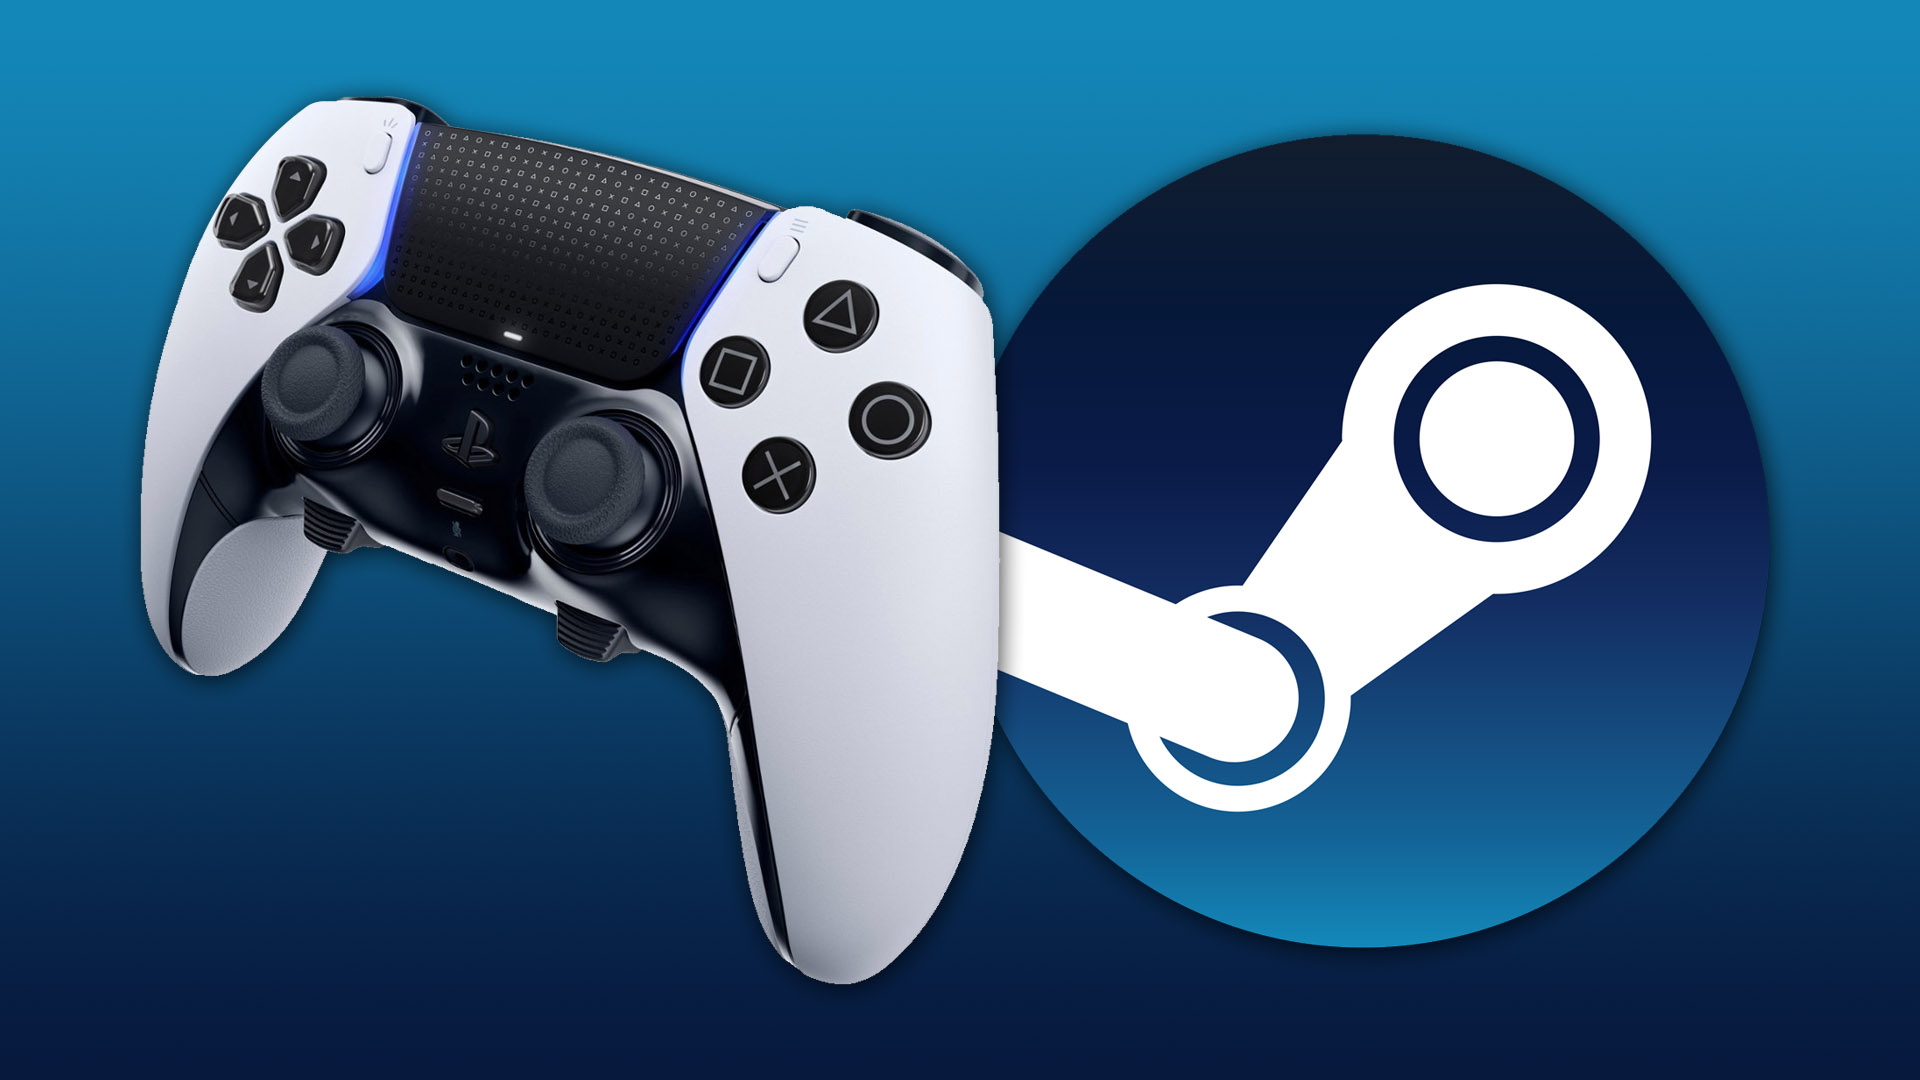 Steam game listings will show support for PlayStation controllers